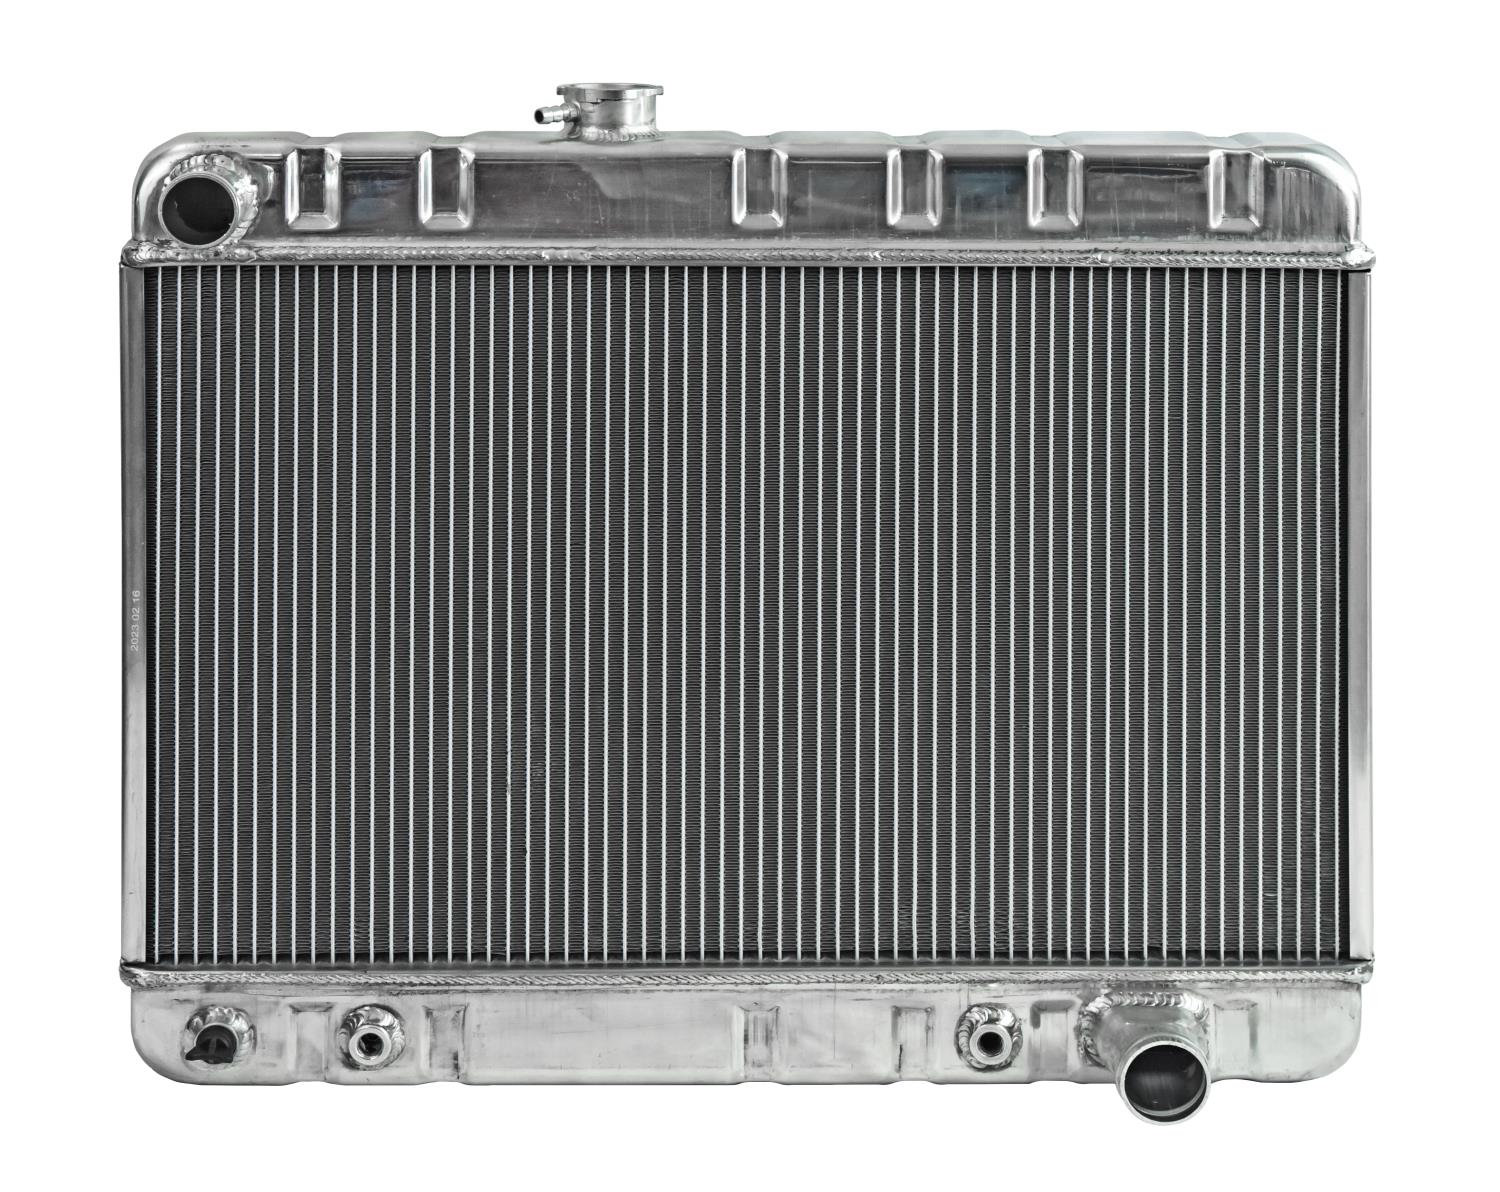 Reproduction Aluminum Radiator for 1966-1967 Pontiac GTO, Tempest, & LeMans [Without Air Conditioning]